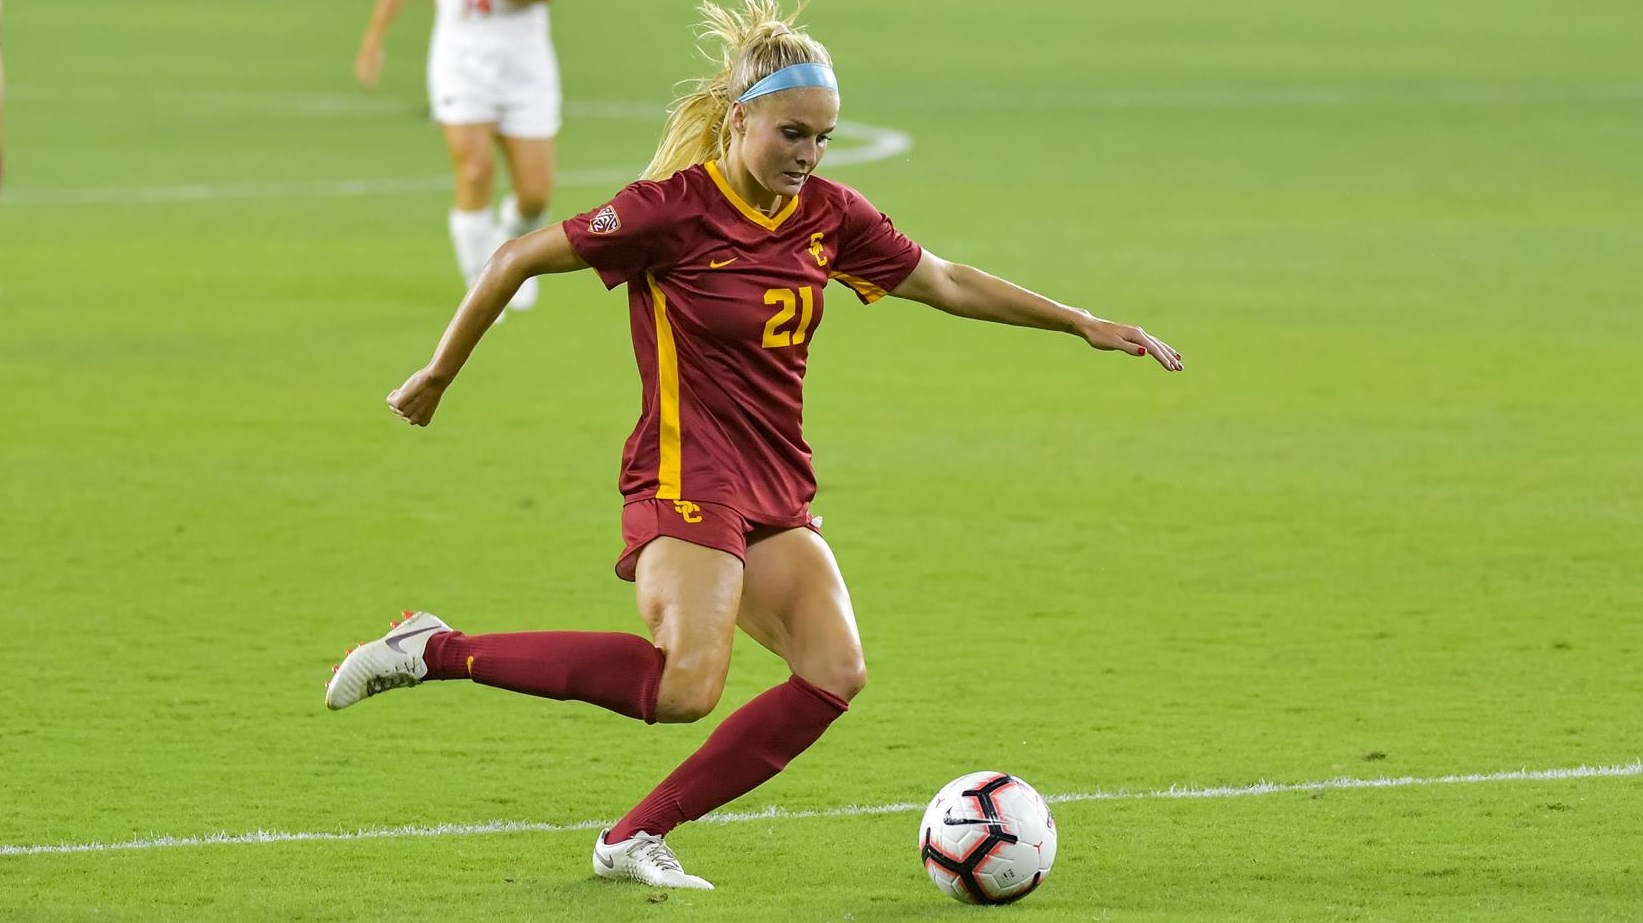 Washington Spirit select Natalie Jacobs 13th overall in 2020 NWSL Draft Featured Image